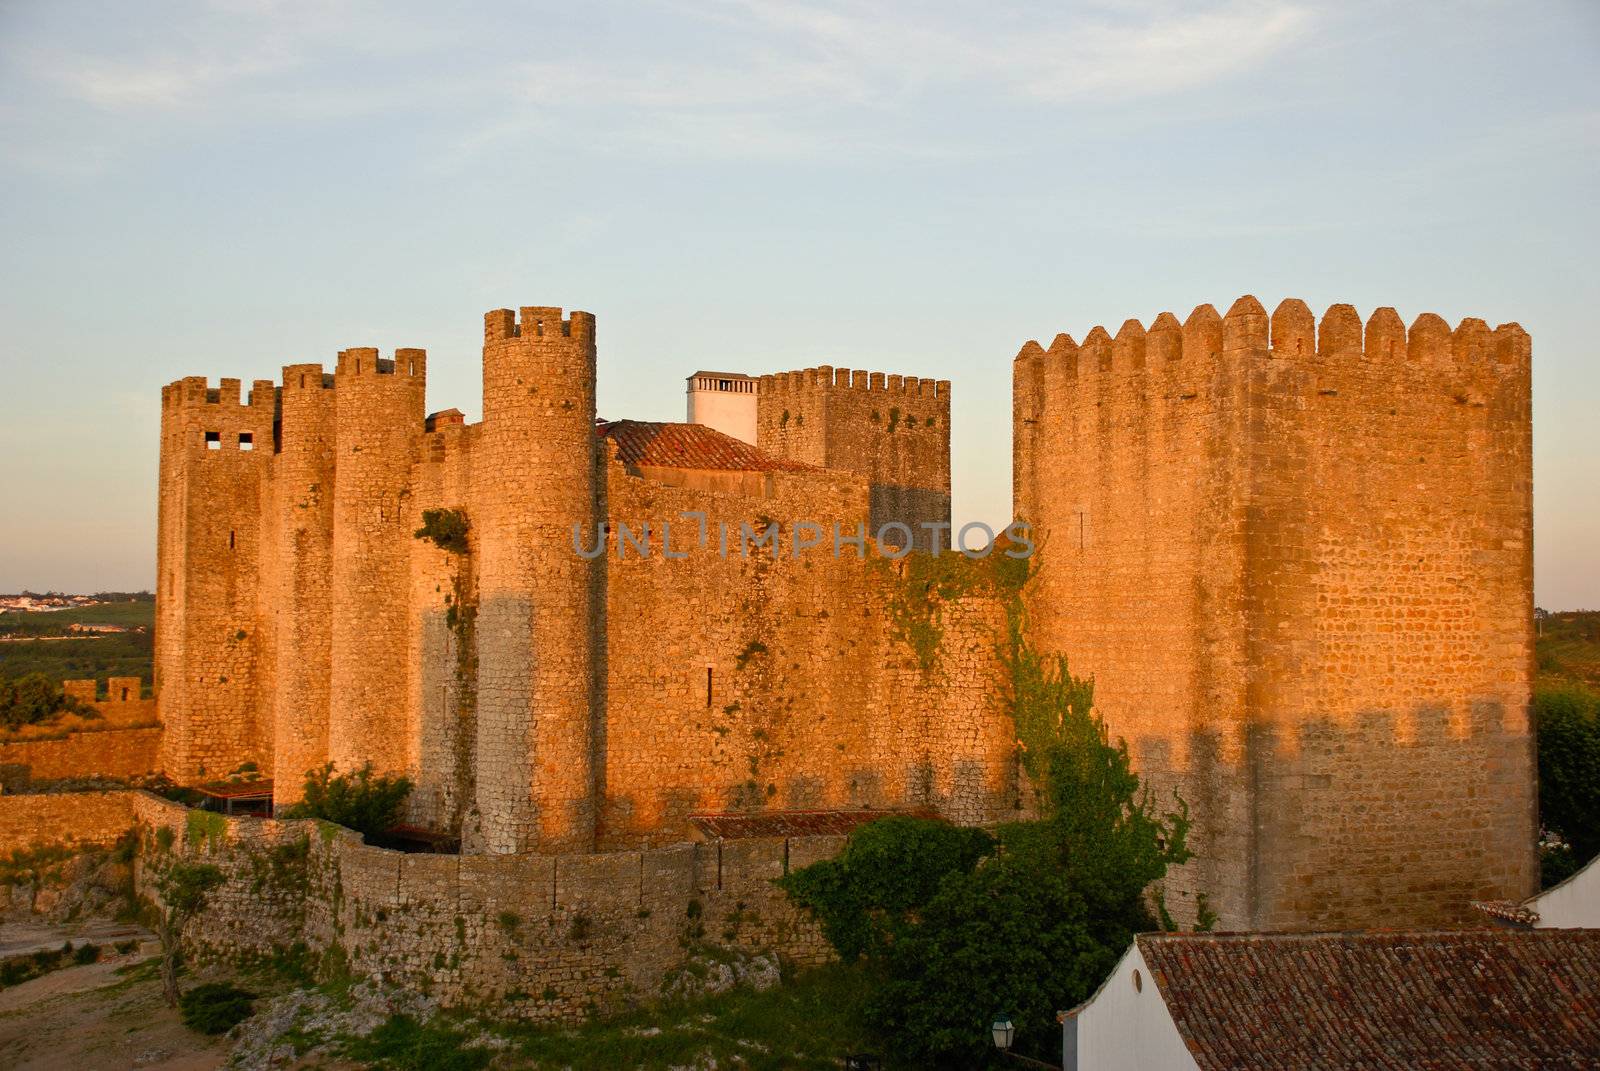 Ancient castle in Obidos, Portugal at sunset